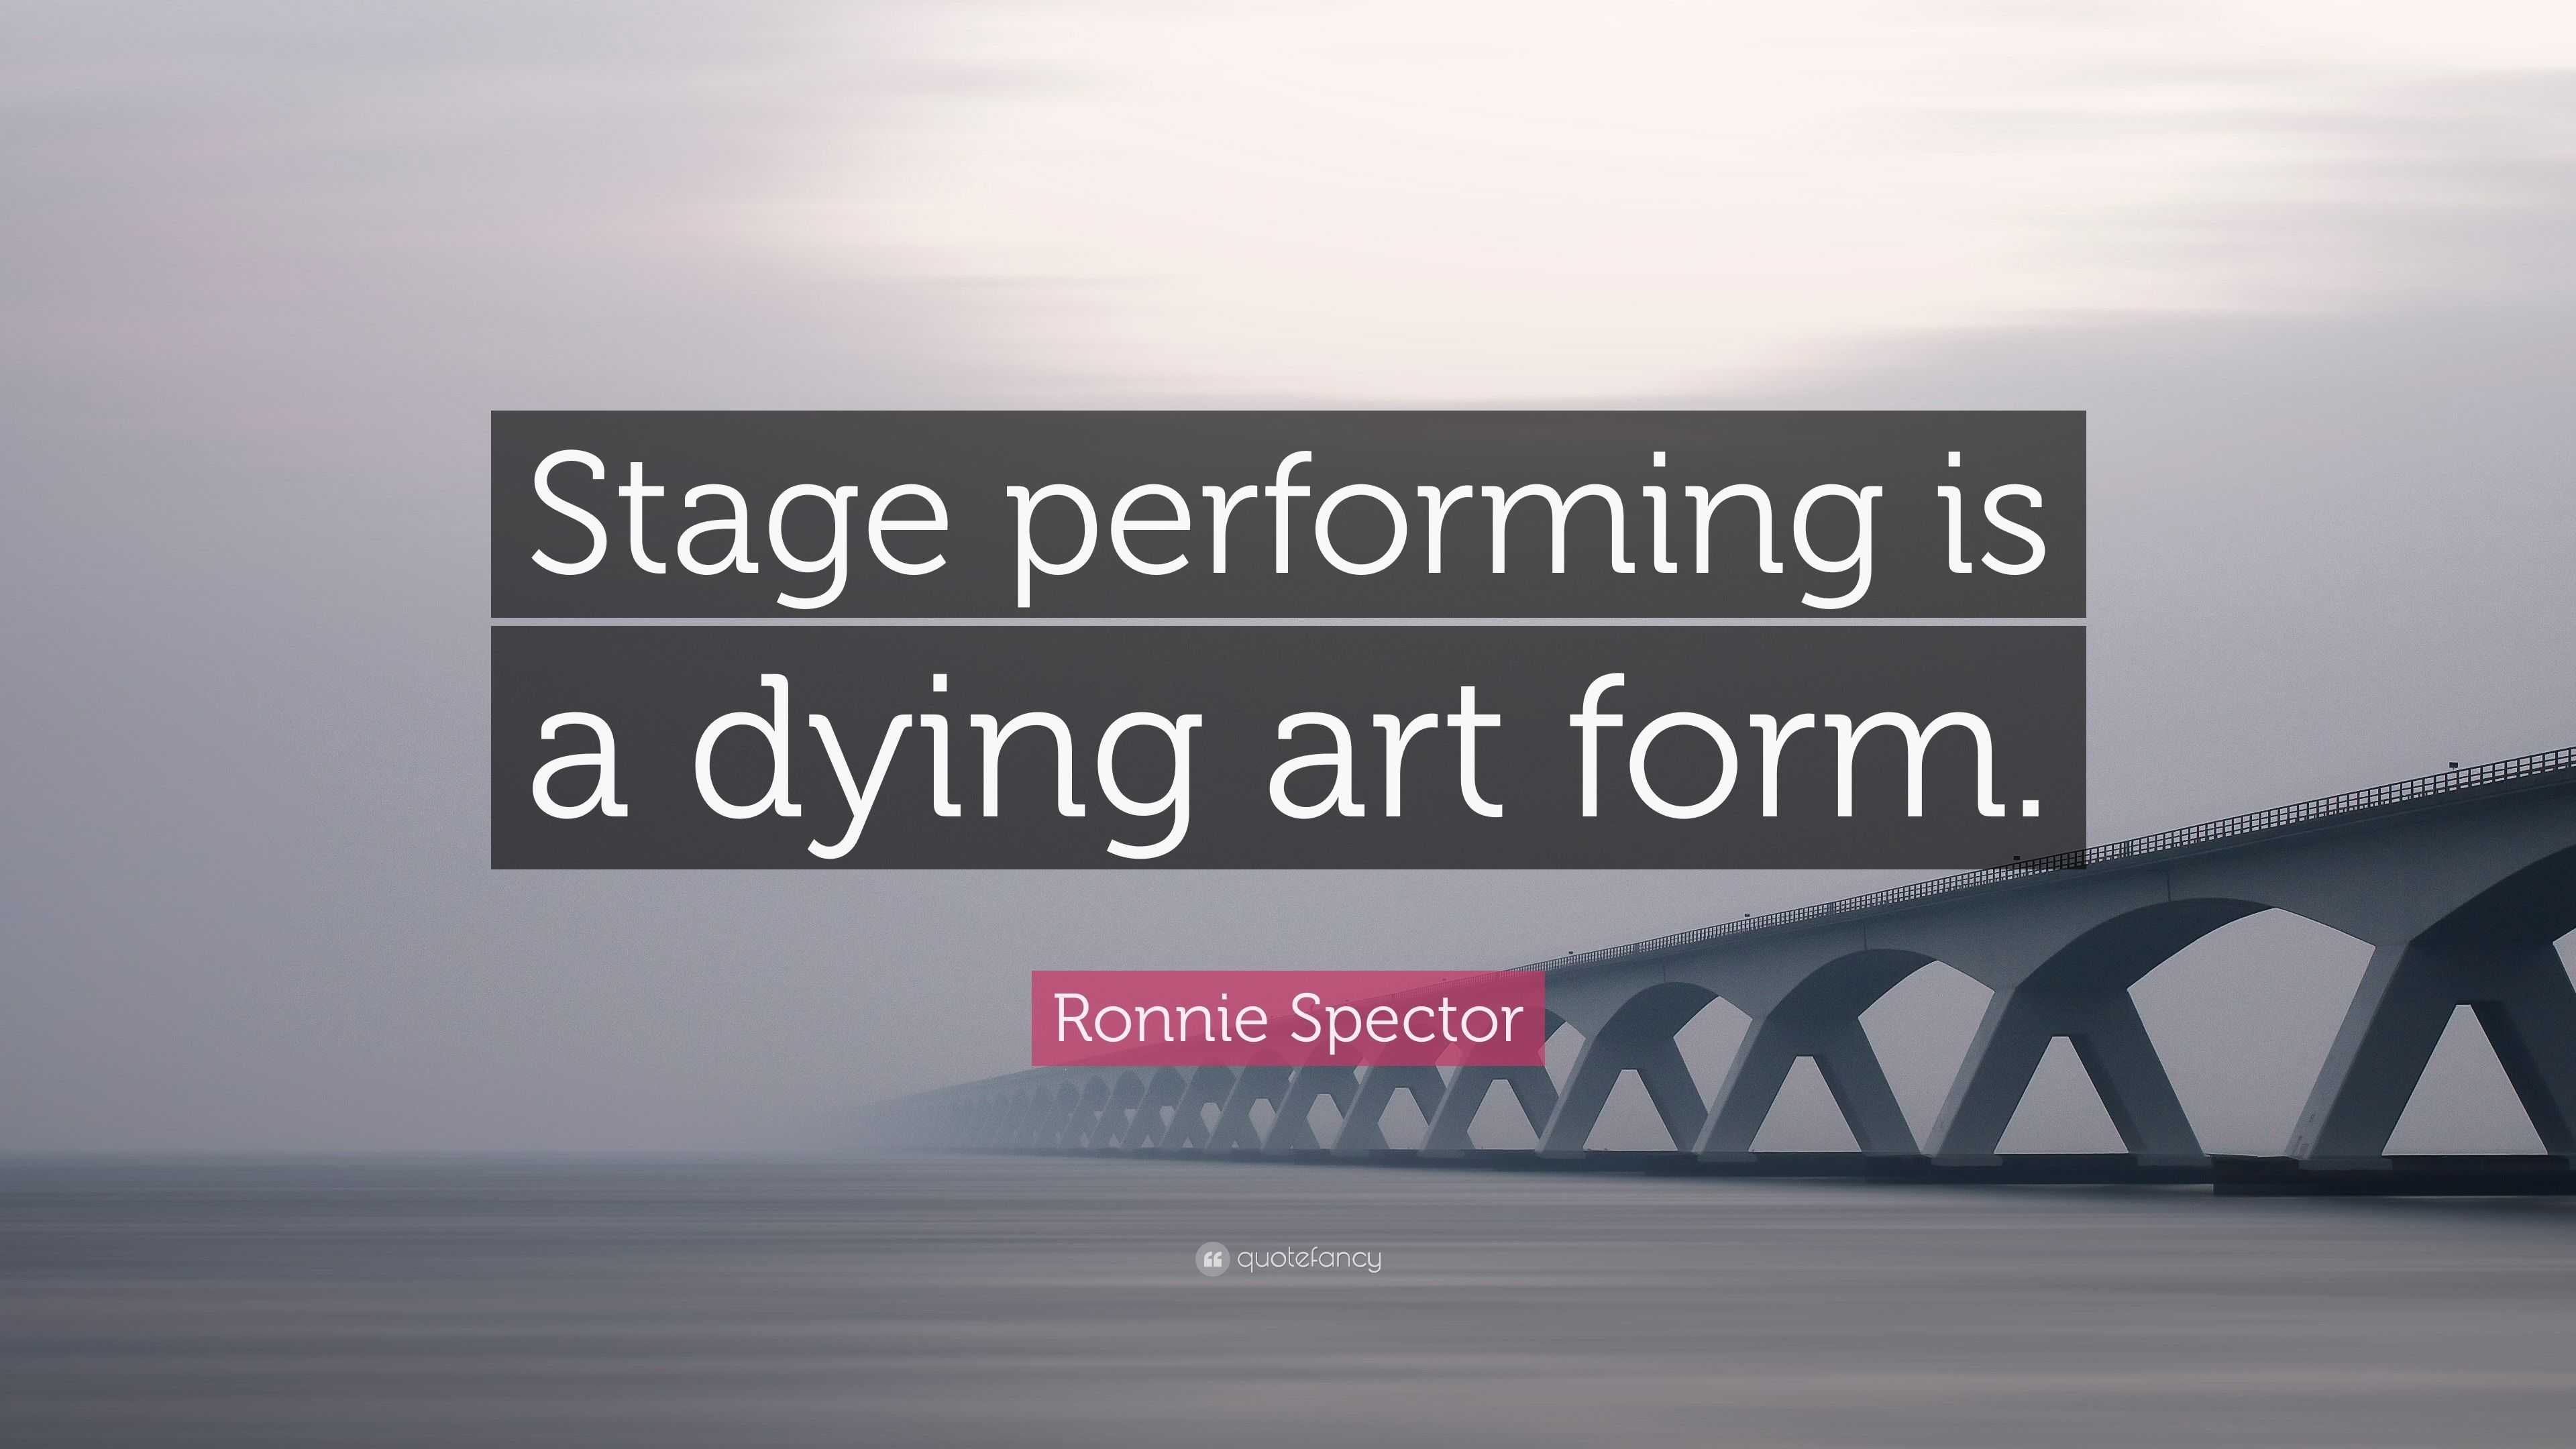 5787870 Ronnie Spector Quote Stage performing is a dying art form